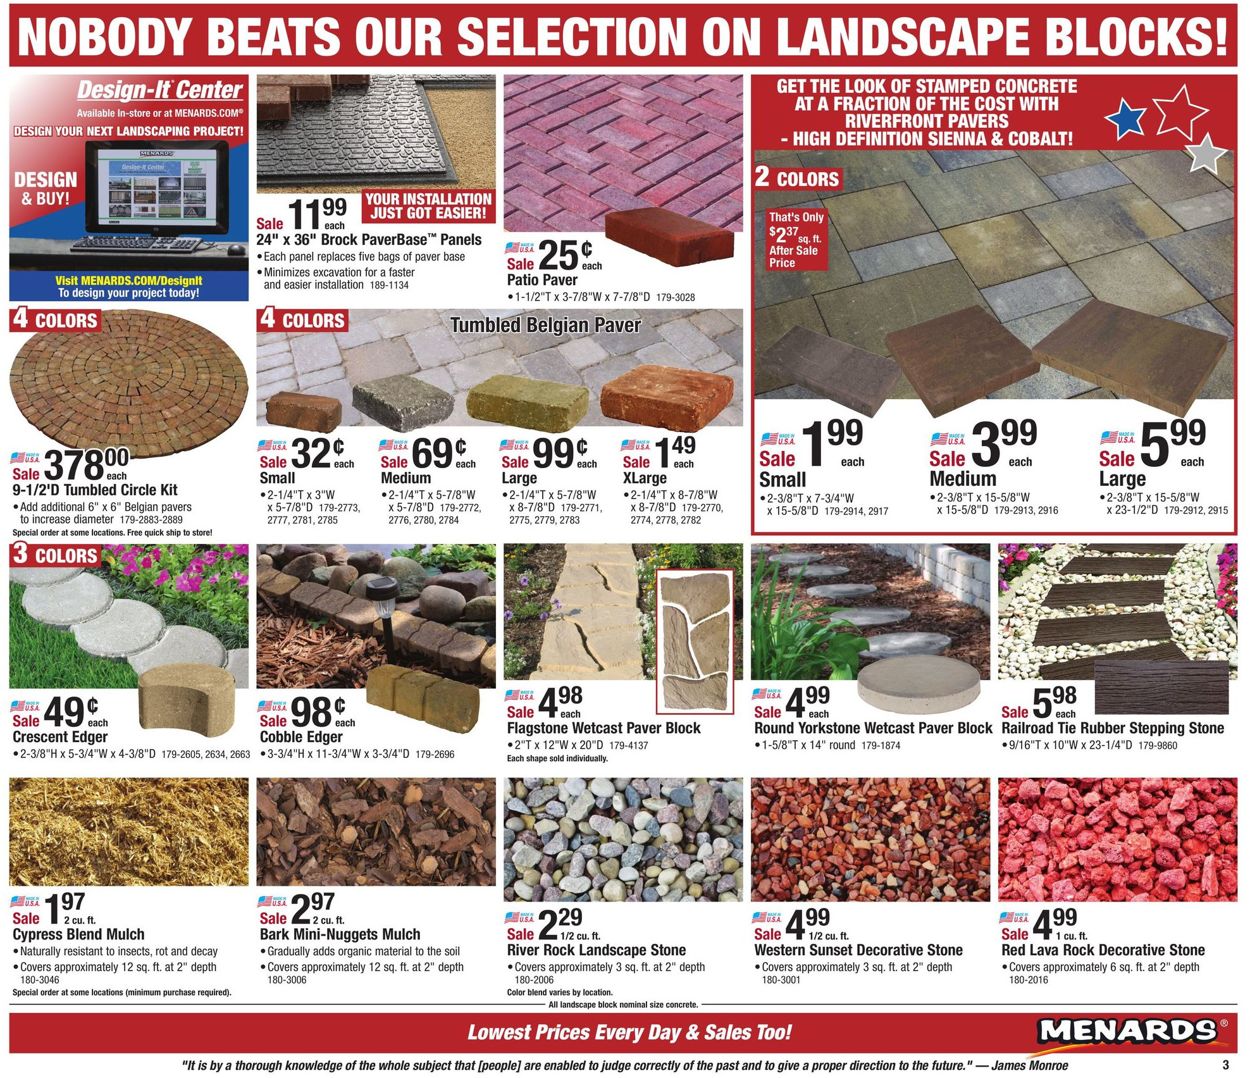 Menards Current weekly ad 06/23 - 07/06/2019 [5] - 0